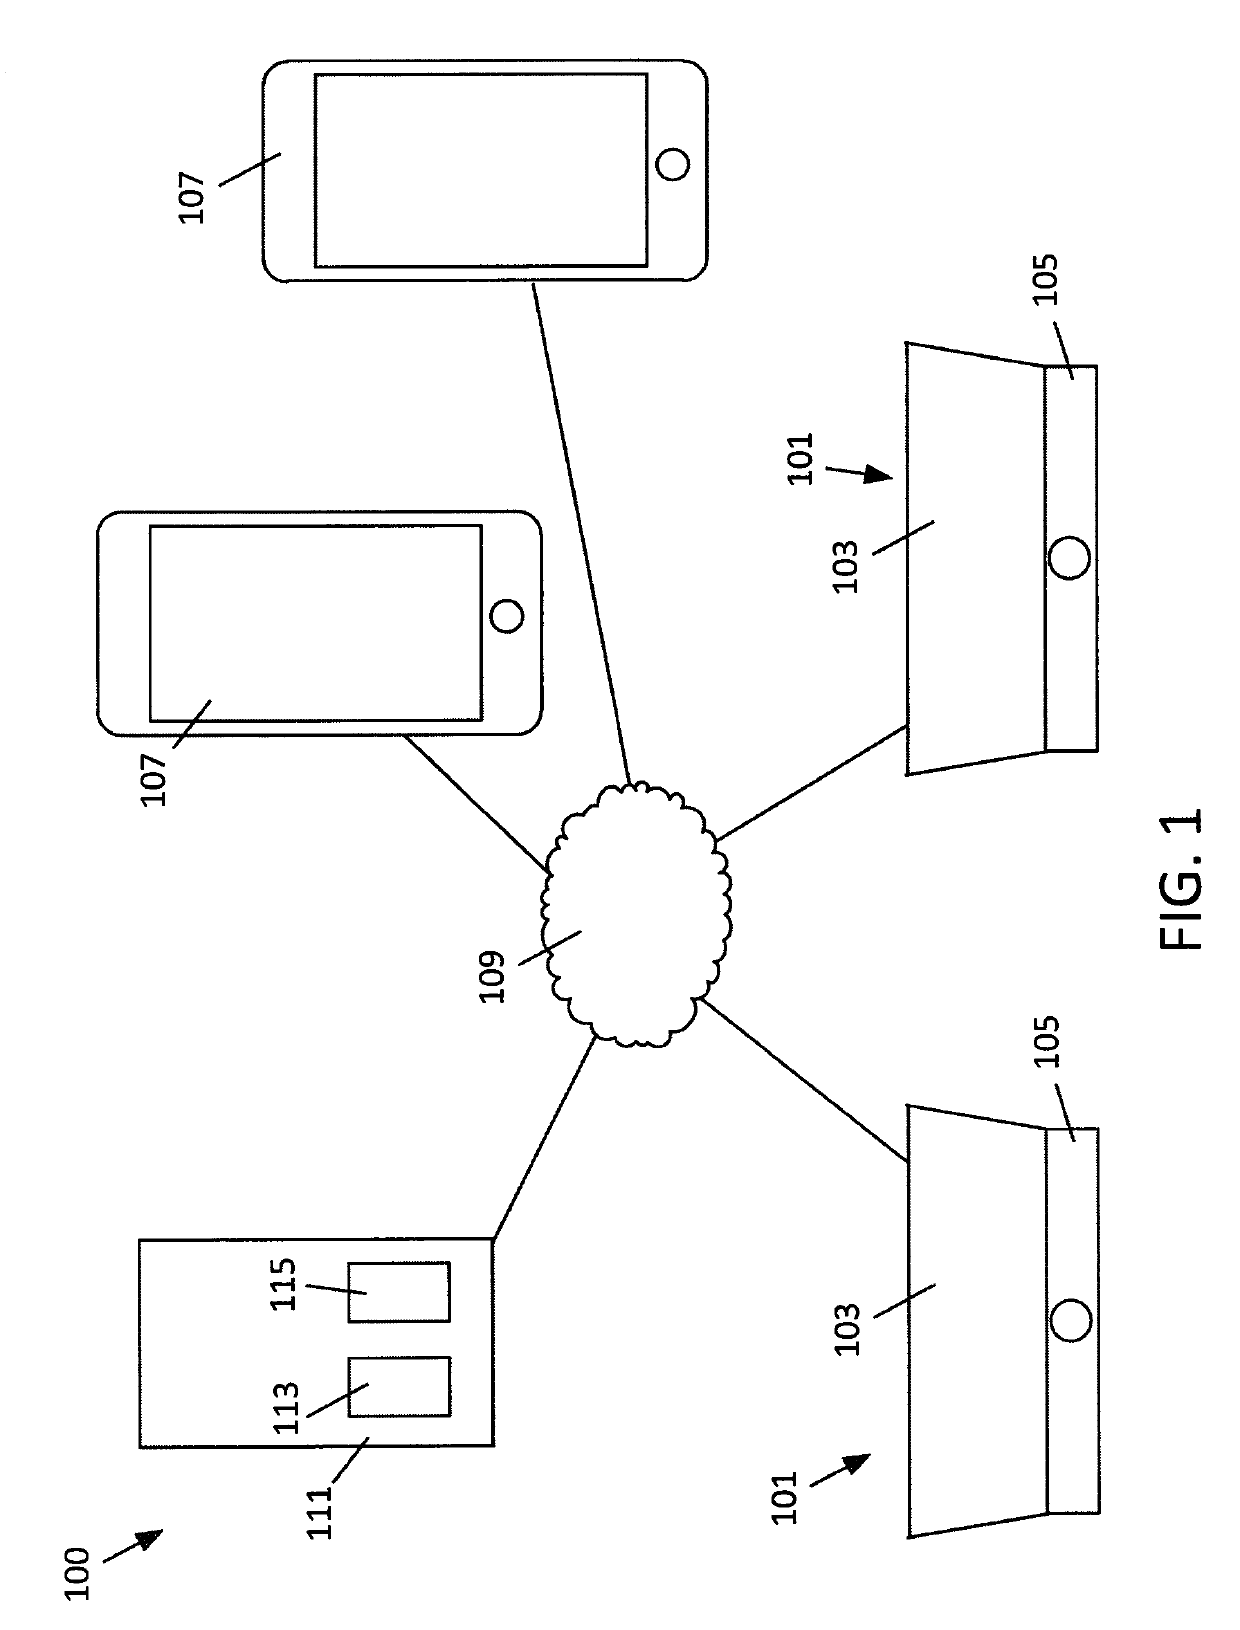 Smart tableware system, apparatus and method